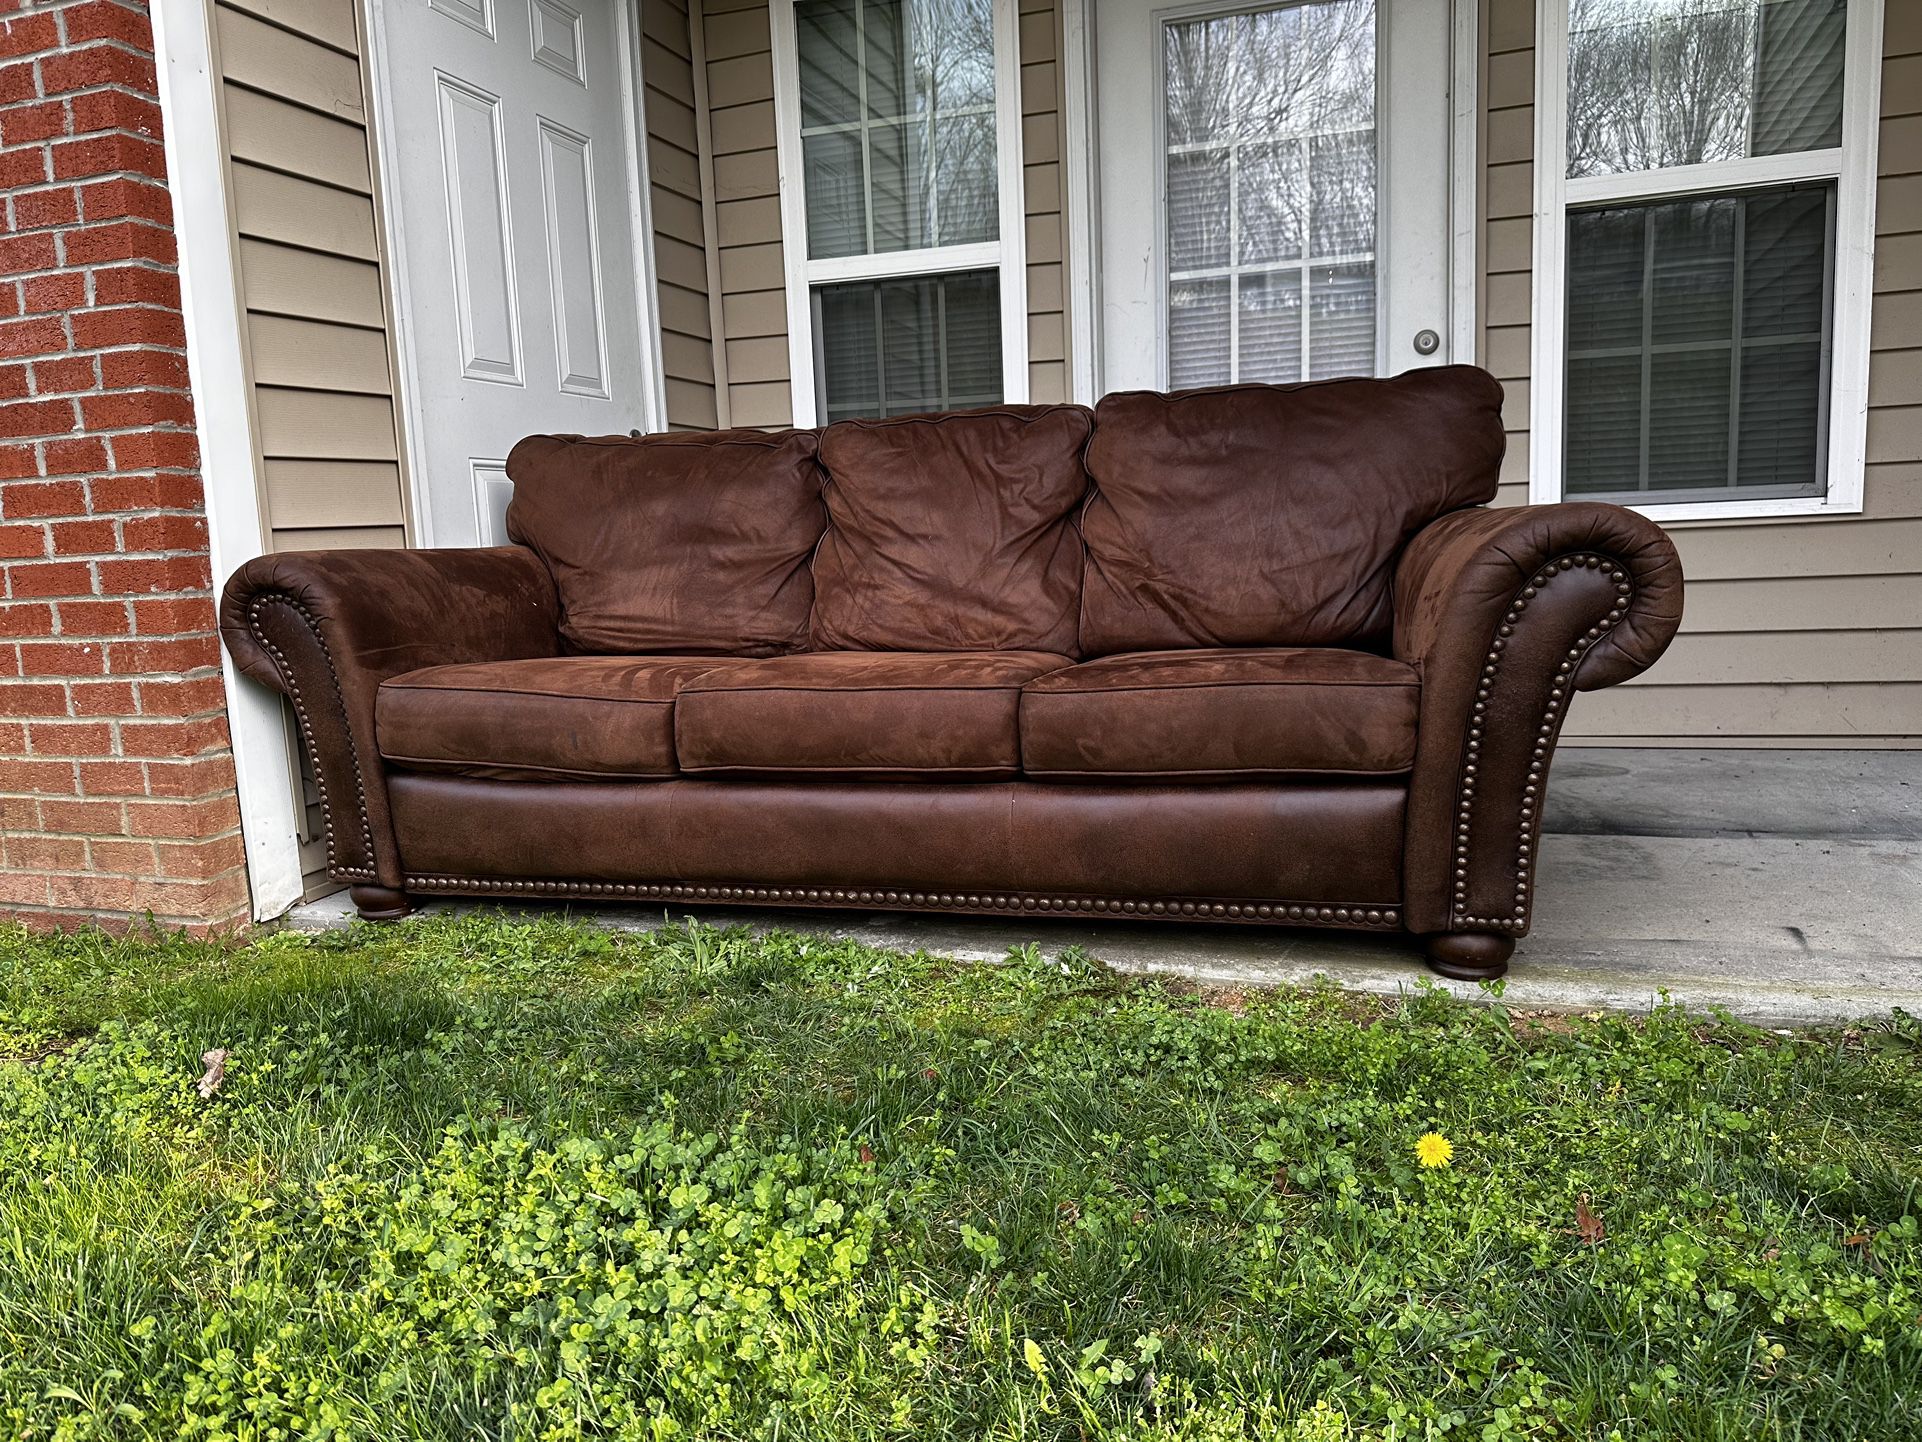 False Leather Couch